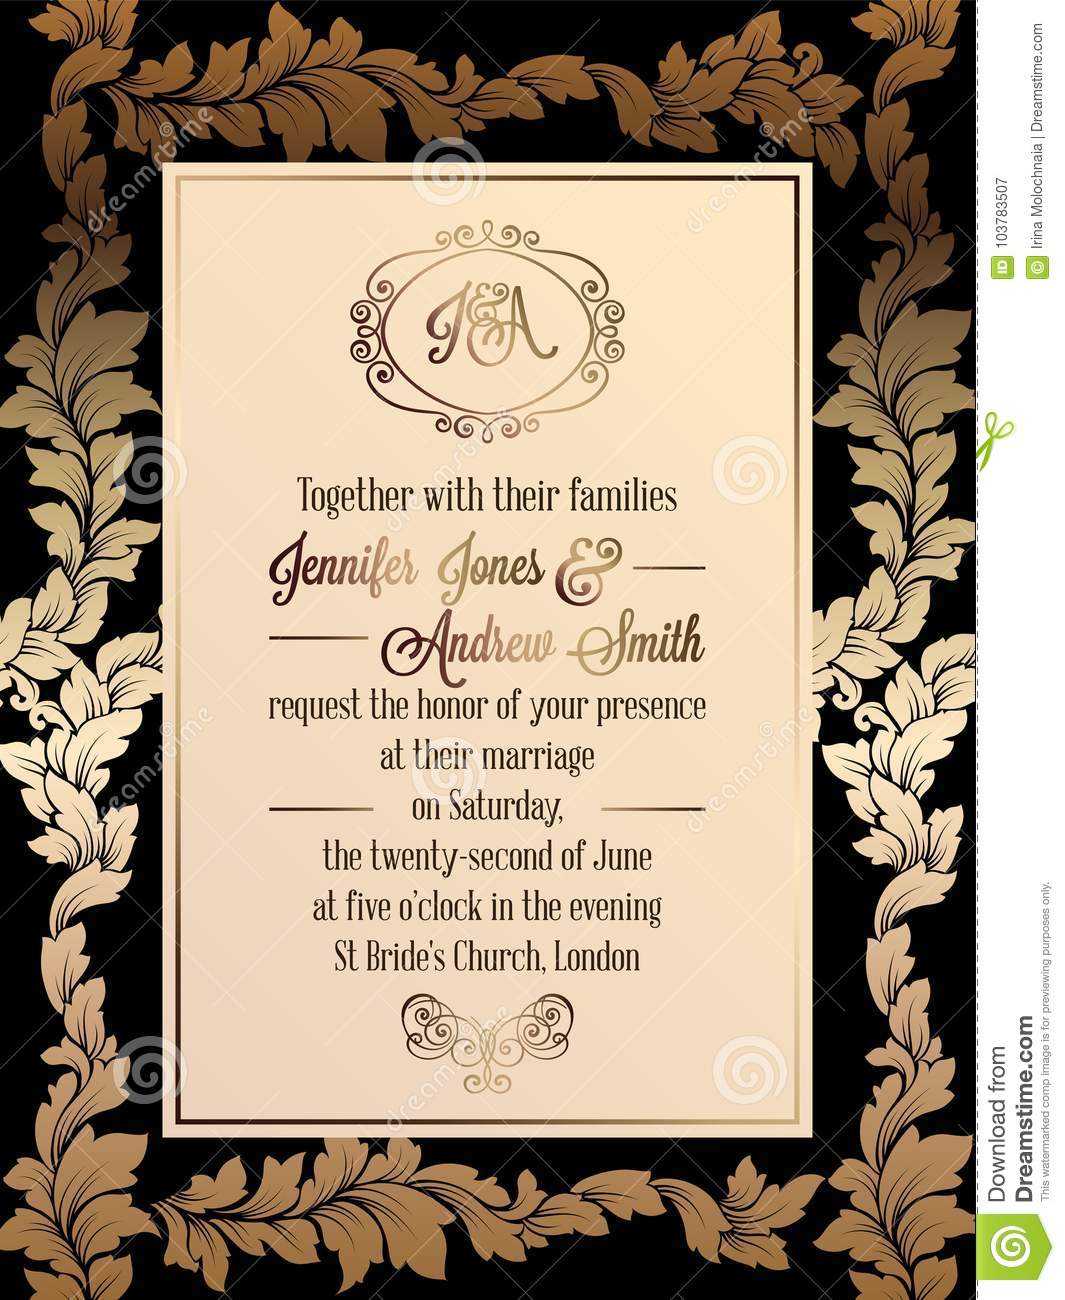 Vintage Baroque Style Wedding Invitation Card Template Pertaining To Church Wedding Invitation Card Template